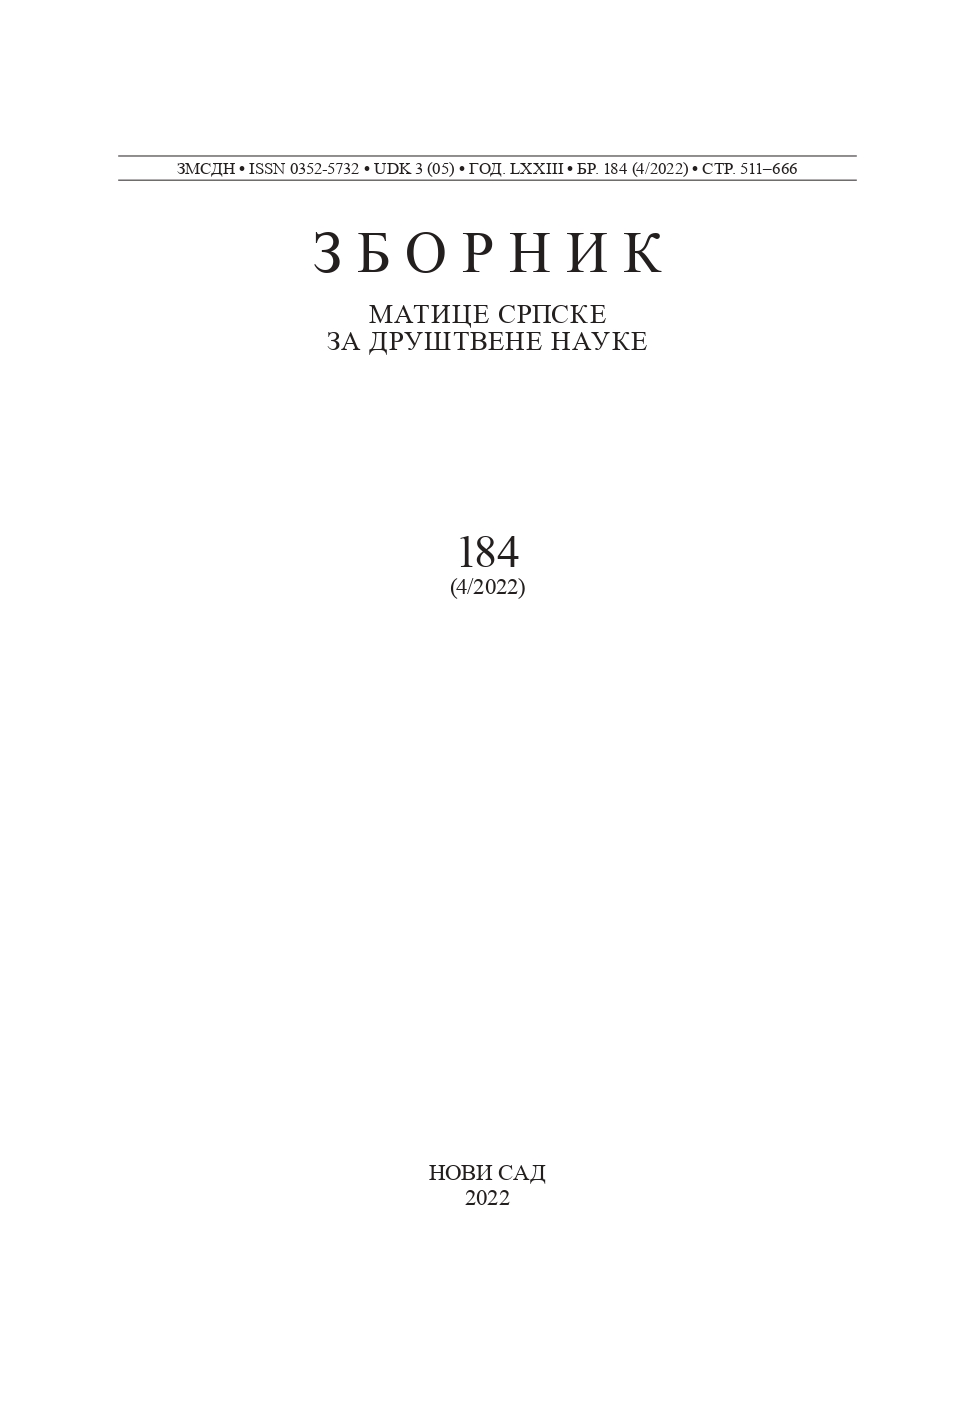 DIVORCES IN THE REPUBLIC OF SERBIA FROM 1950 TO 2020 Cover Image